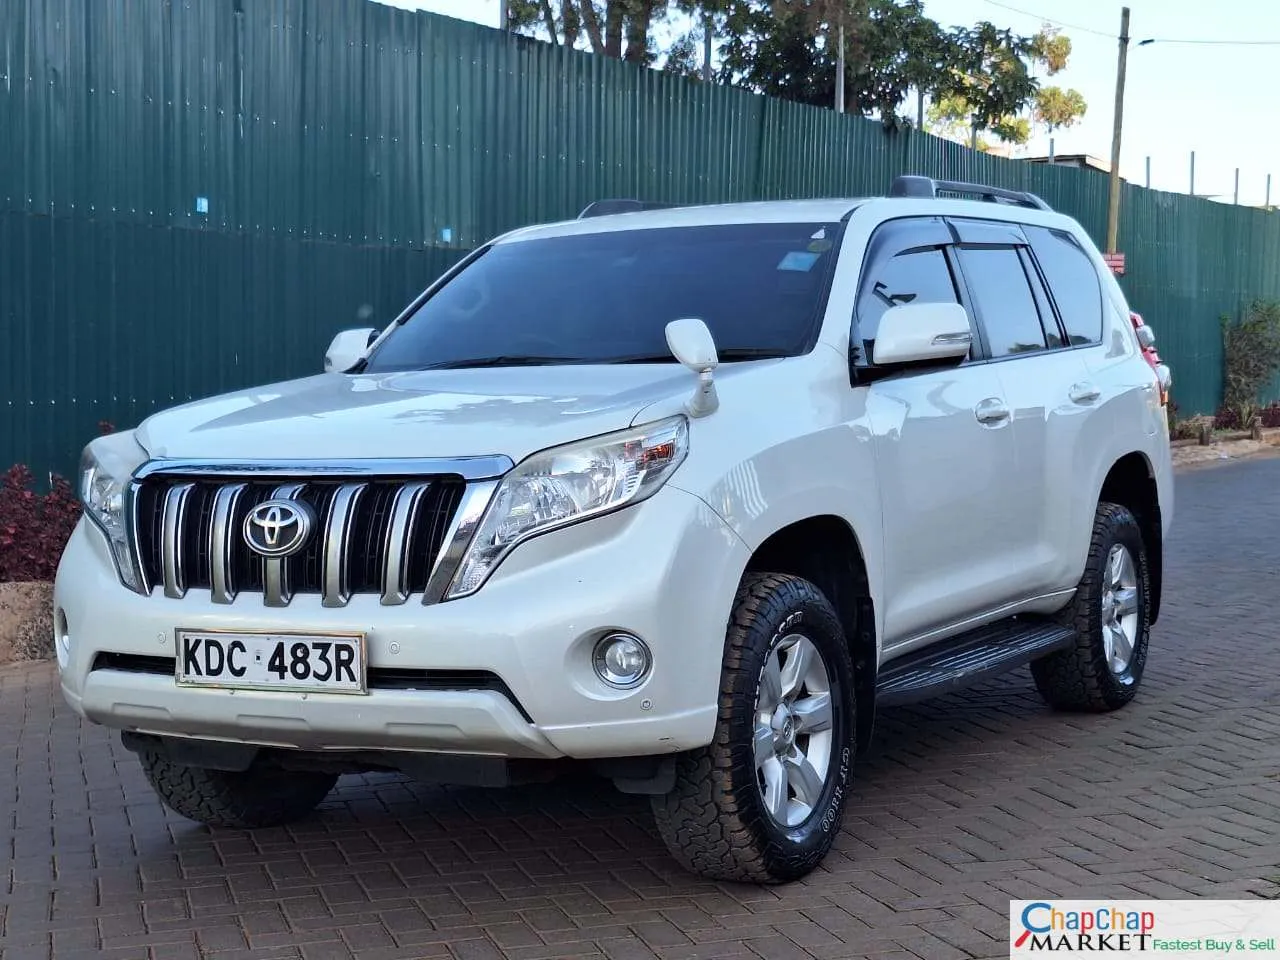 Toyota Prado j150 QUICKEST SALE You Pay 30% Deposit Trade in OK Hire purchase installments new